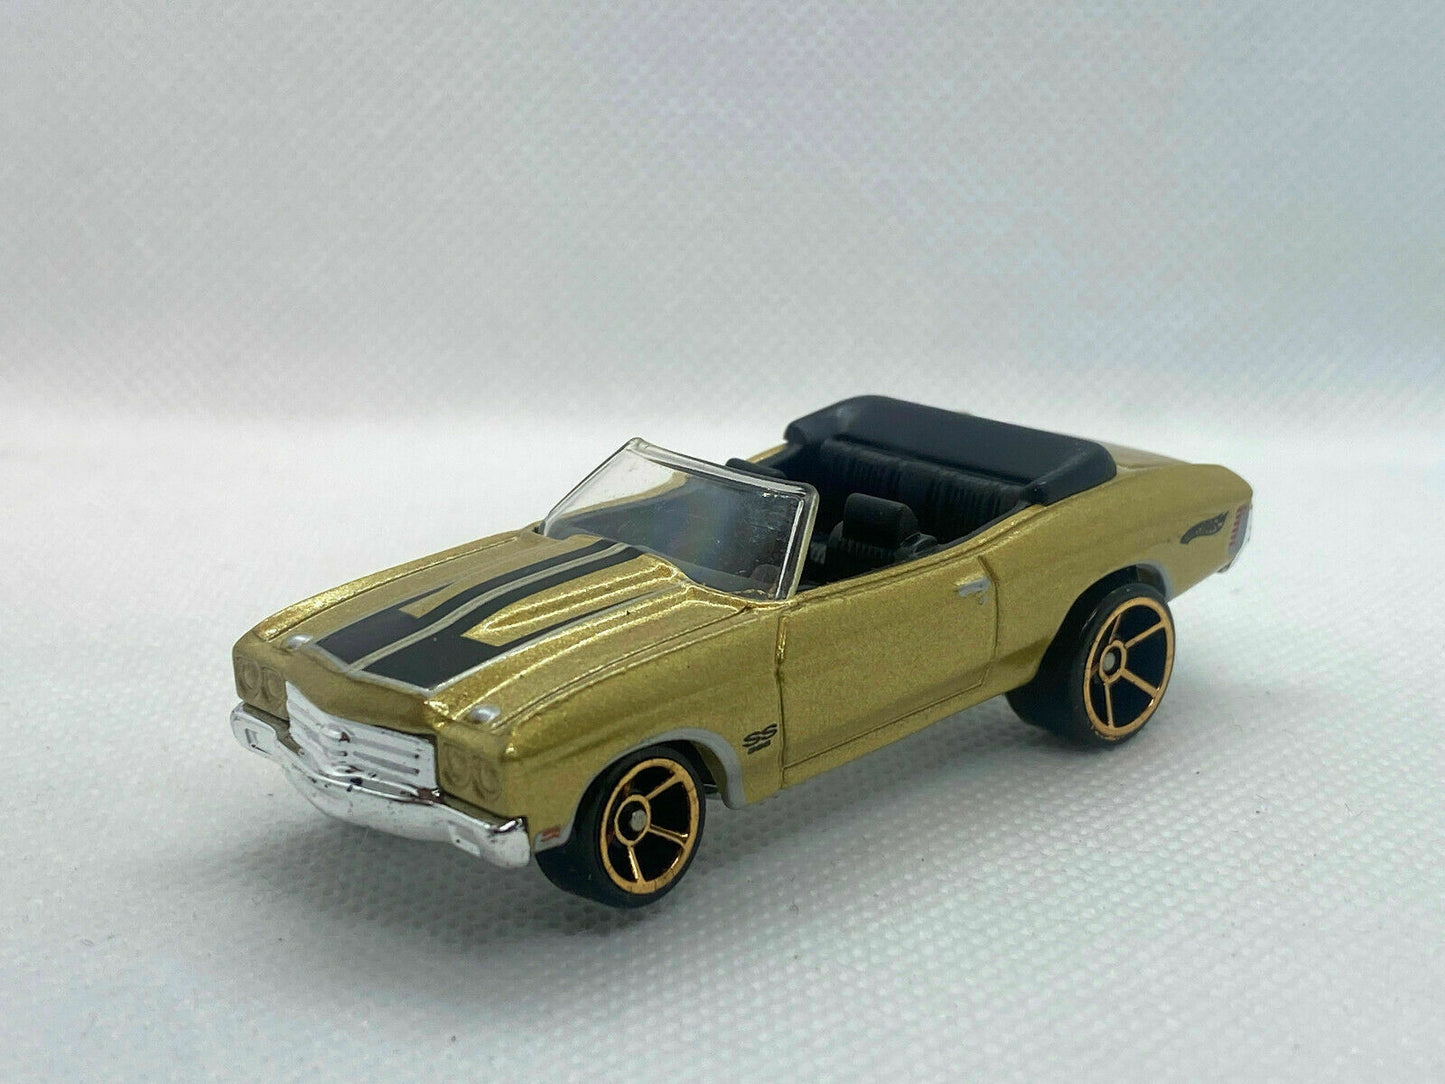 2010 Hot Wheels 1970 Chevorlet Chevelle SS Convertible Loose